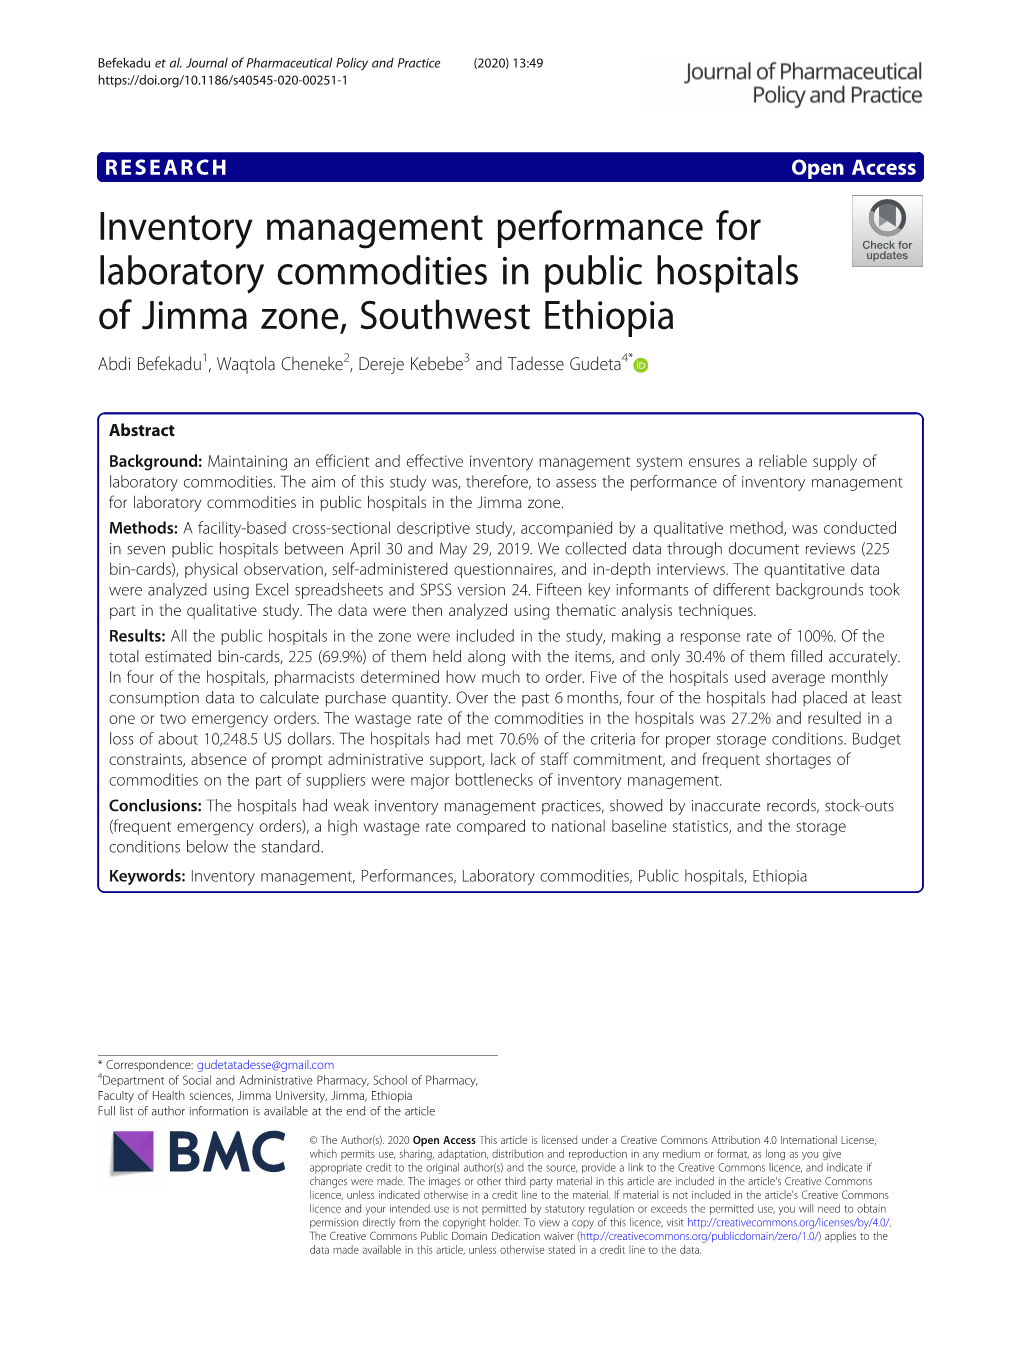 Inventory Management Performance for Laboratory Commodities in Public